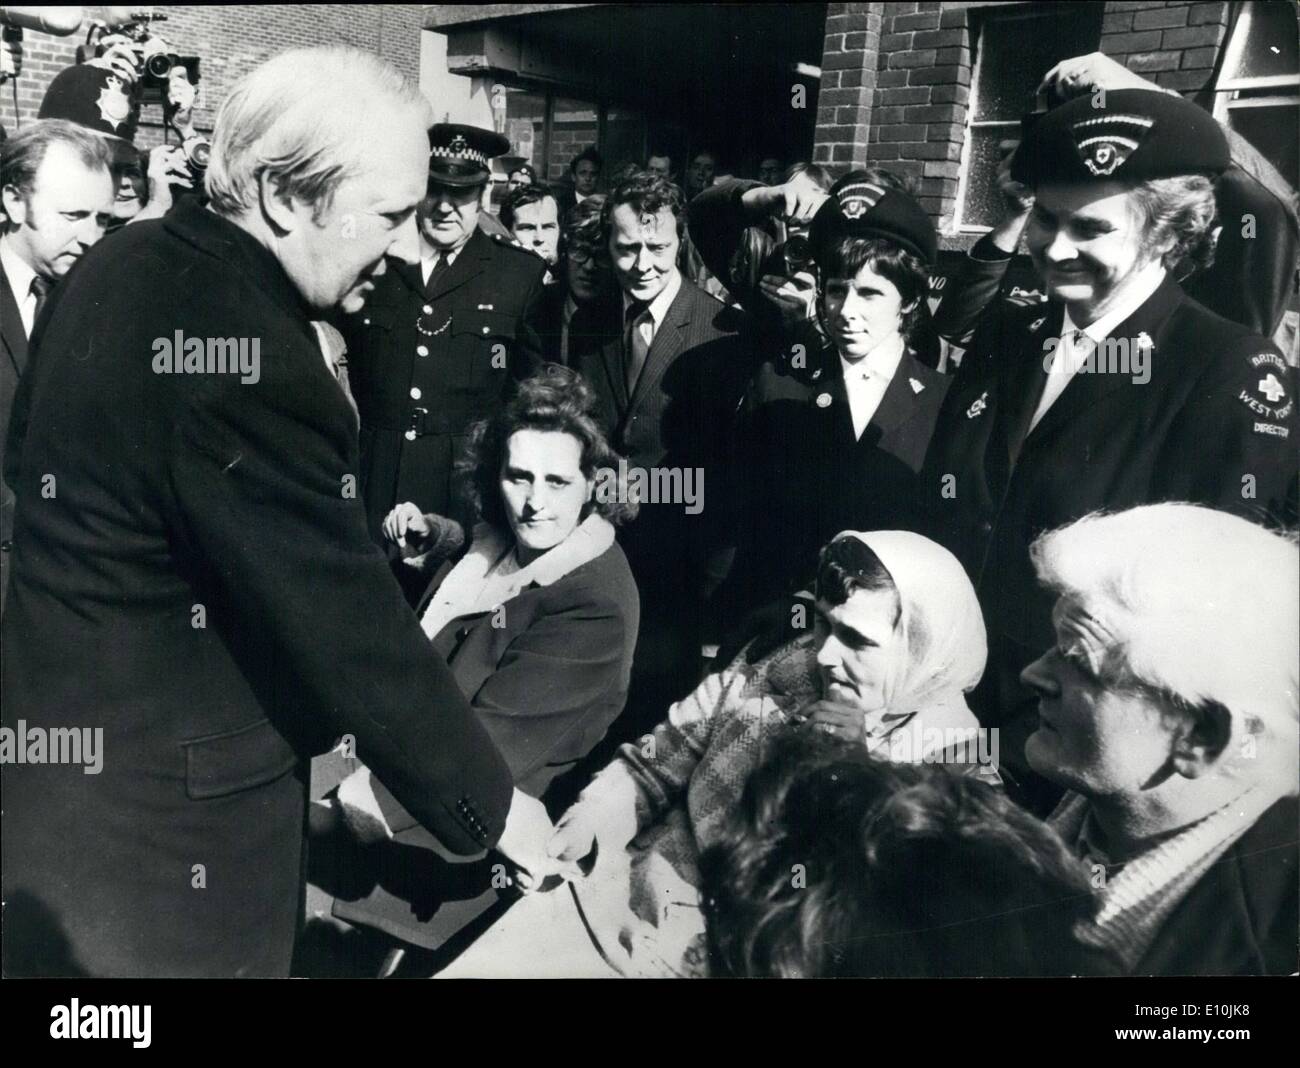 Mar. 03, 1973 - The Prime Minister talks to relatives of trapped miners at Lofthouse colliery in Yorkshire: Hopes of an early breakthrough to the spot where the seven missing Yorkshire miners are entombed sank last night as rescuers came up against a wall of mud and sludge. It extended for about 120-feet along the approach tunnel at Lofthouse Colliery, near Wakefield, Yorkshire. Yesterday Mr. Heath, the Prime Minister, paid a visit to the colliery and spoke to relatives of the trapped miners. Photo shows MR Stock Photo